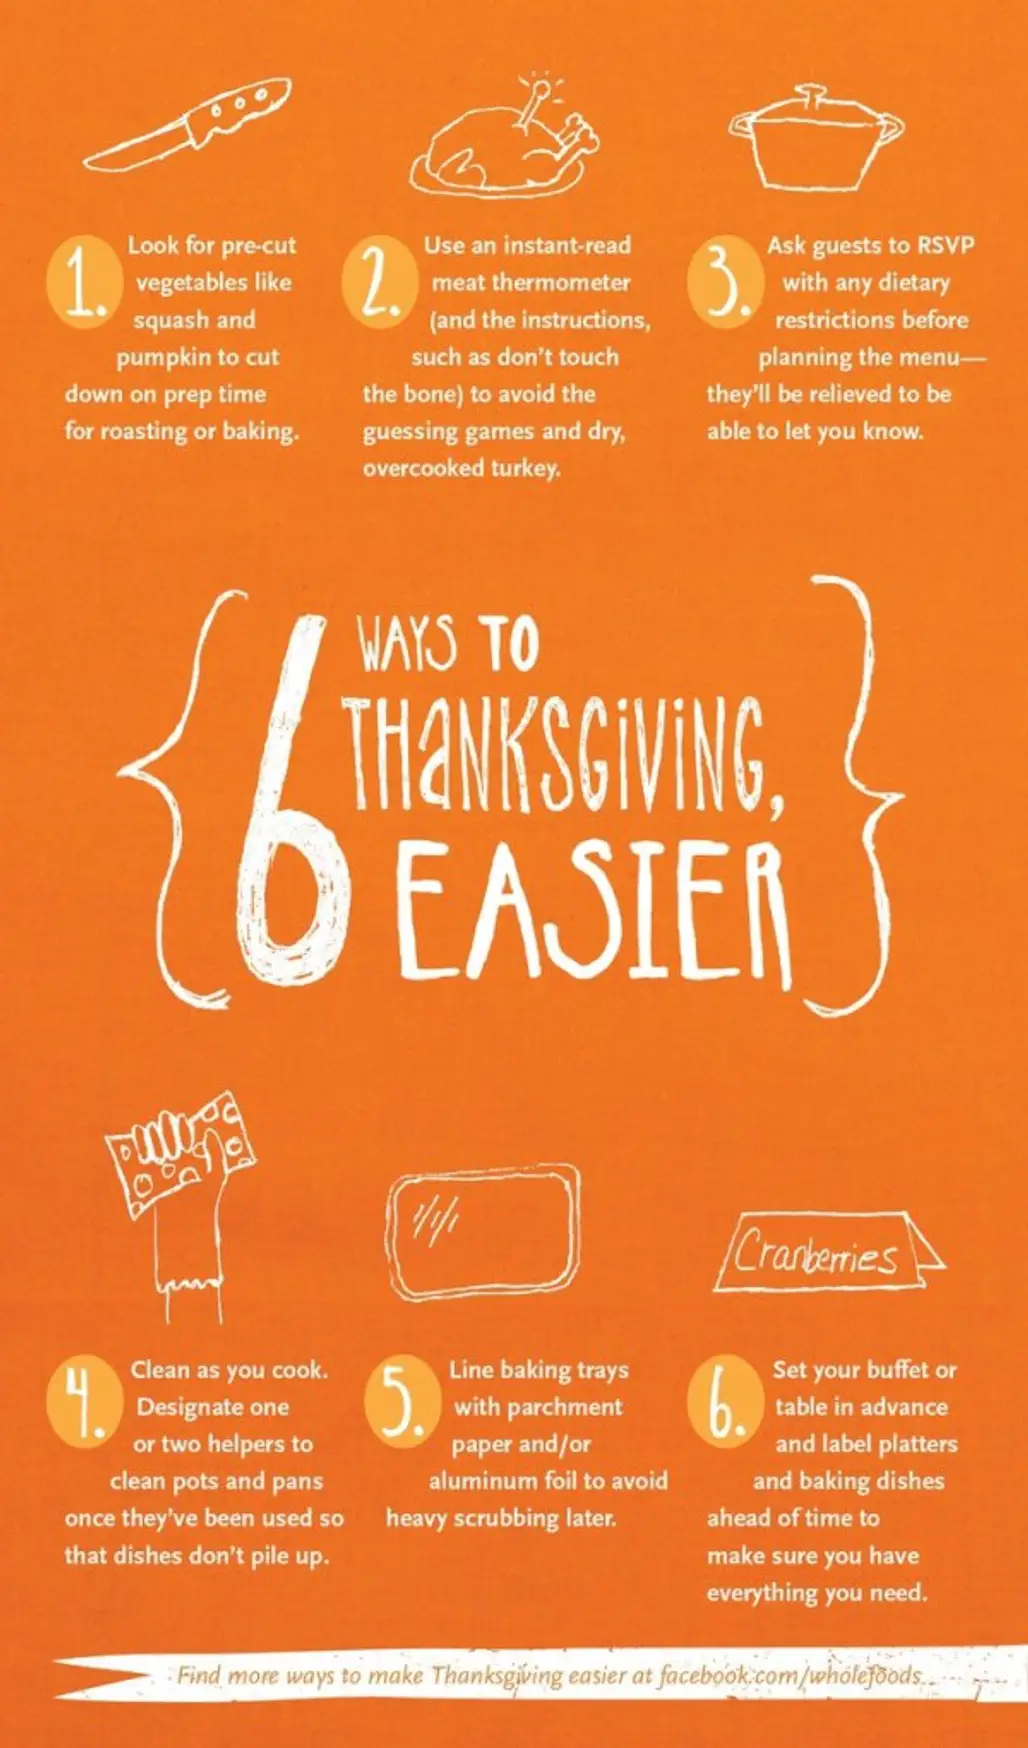 6 Tips to Make Your Thanksgiving Easier